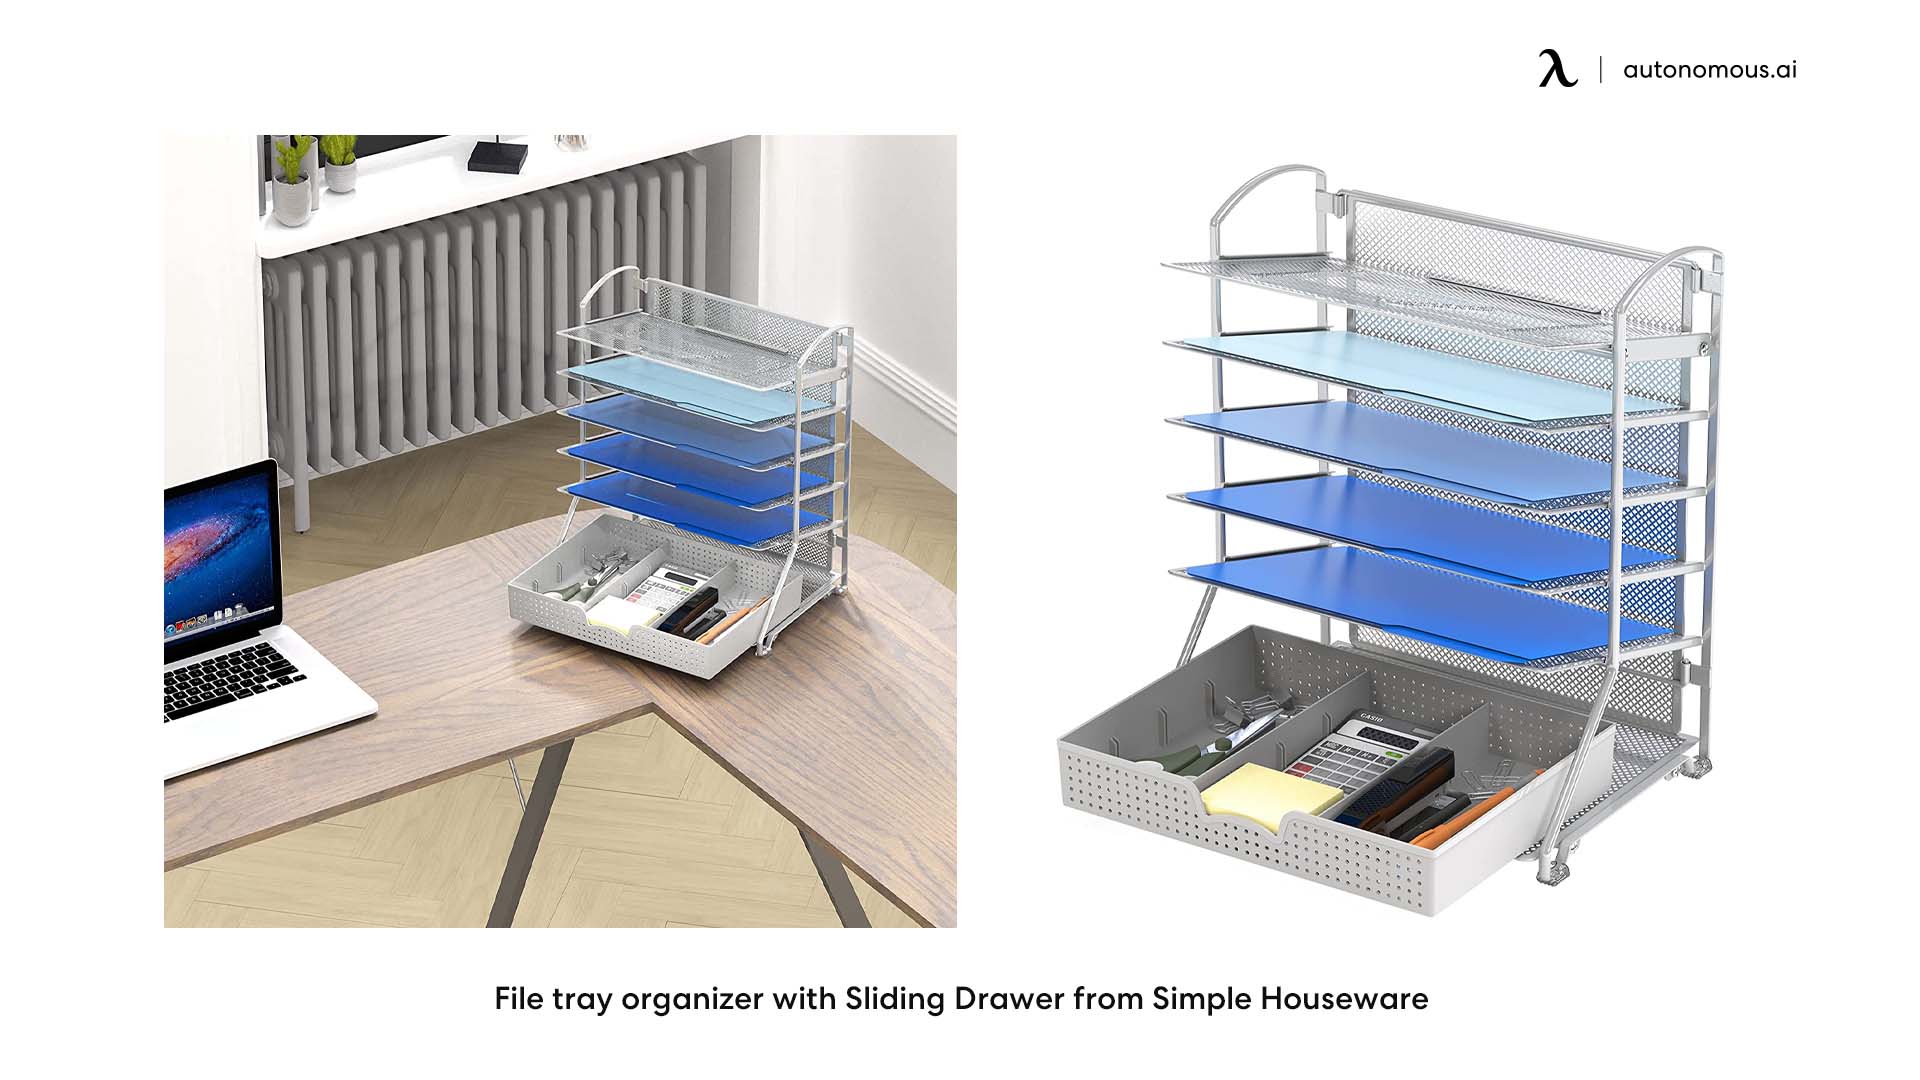 File tray organizer with Sliding Drawer from Simple Houseware